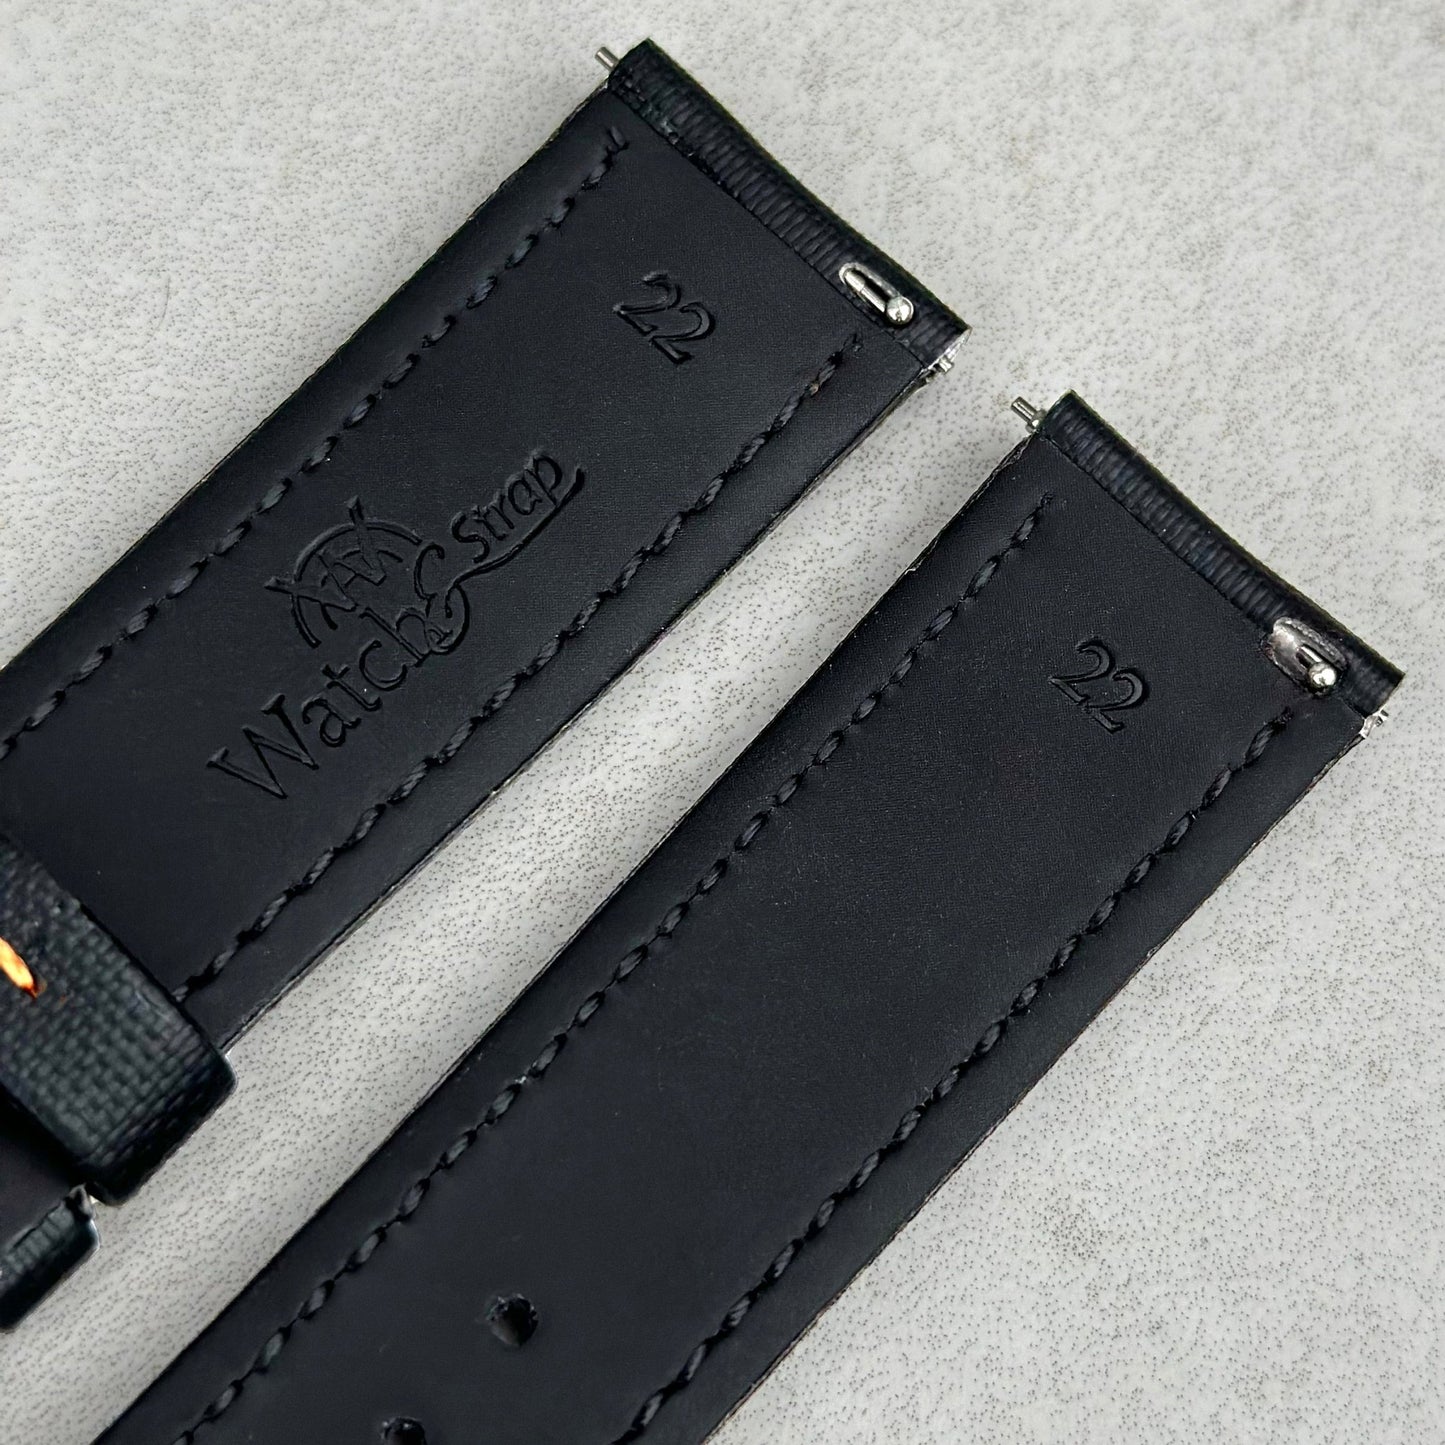 Quick release pins on the Bermuda jet black sail cloth watch strap. Watch And Strap